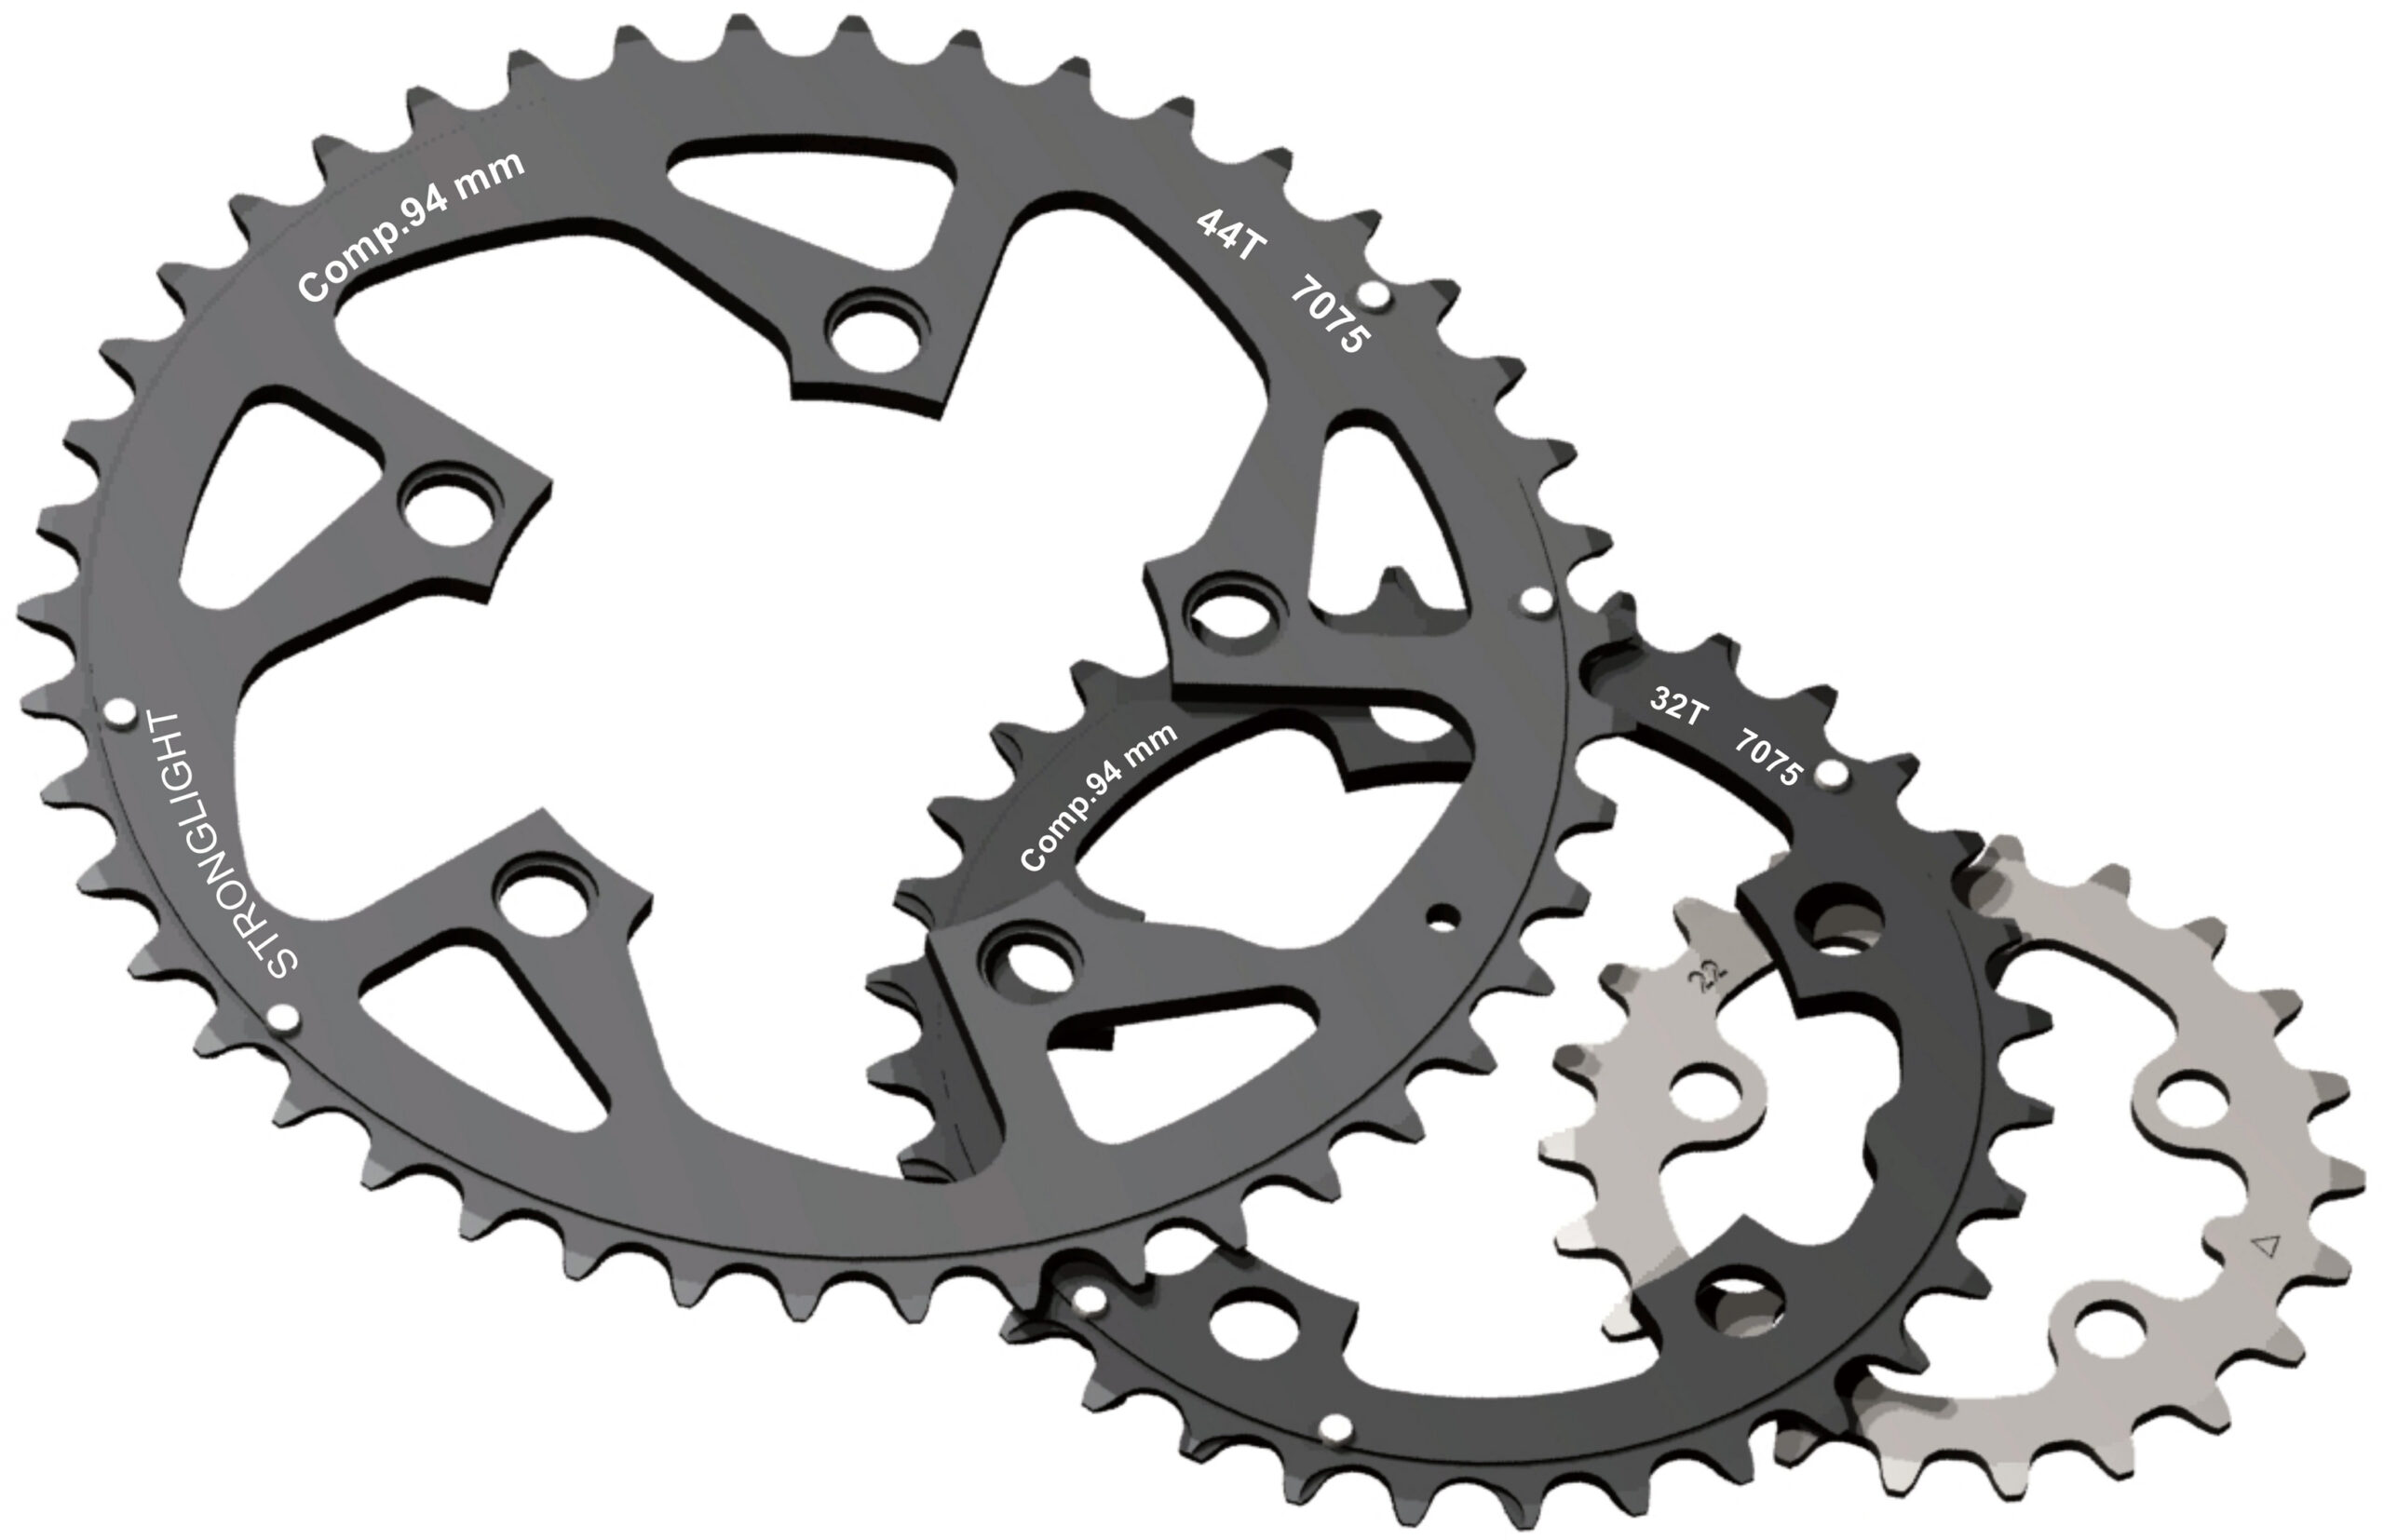 RZ09442Z Stronglight 42T With Pins 5-Arm/94mm Chainring